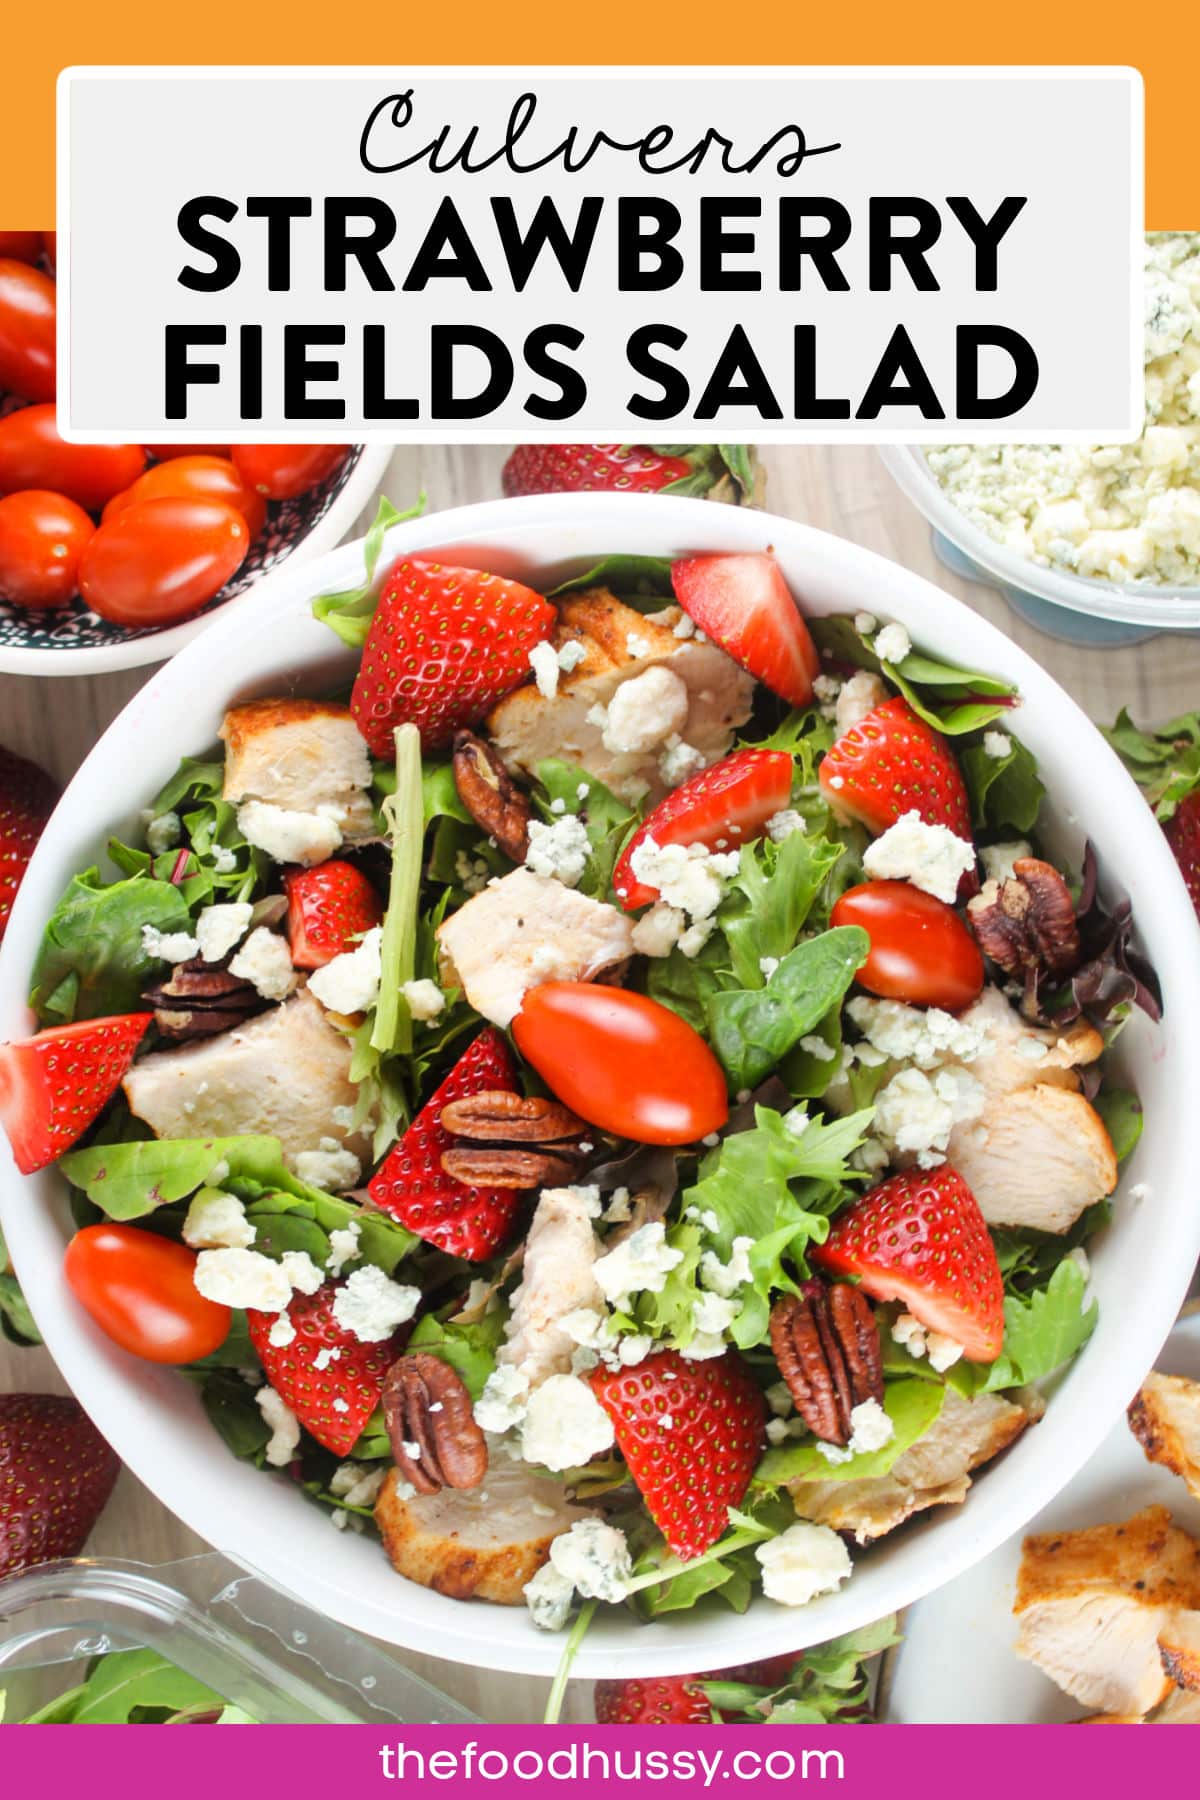 Culver's Strawberry Salad is my favorite seasonal salad! It's the perfect spring salad - spring greens topped with fresh, ripe strawberries, crunchy pecans, flavorful blue cheese crumbles and more! One of the most popular Culver's menu items - this salad is the flavor of spring! via @foodhussy